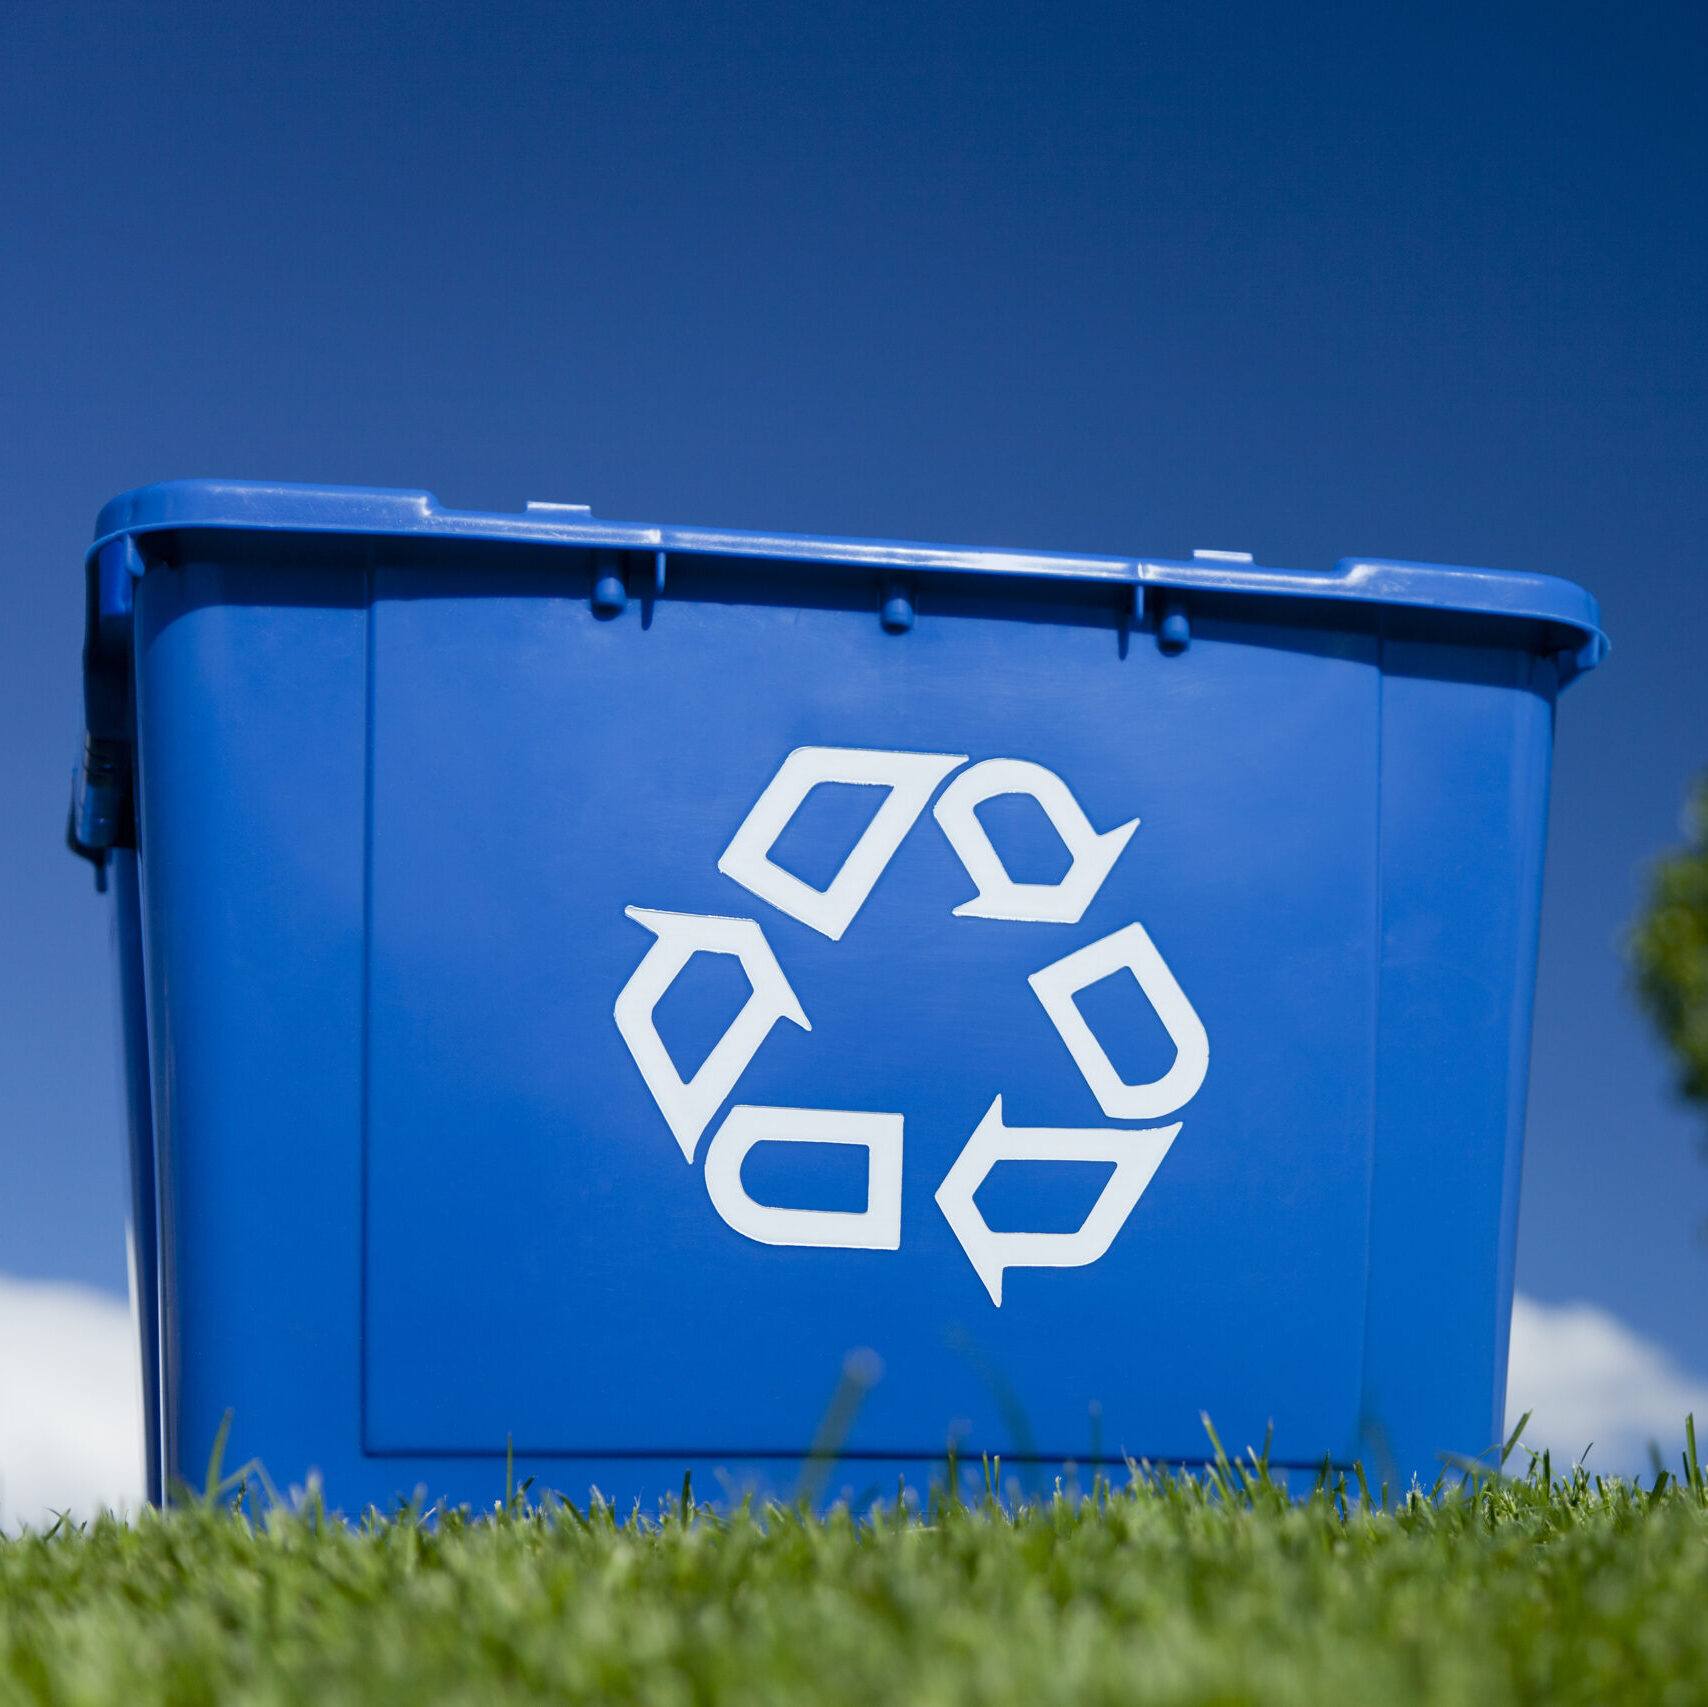 Recycleing bin on grass with sky and tree in the background.